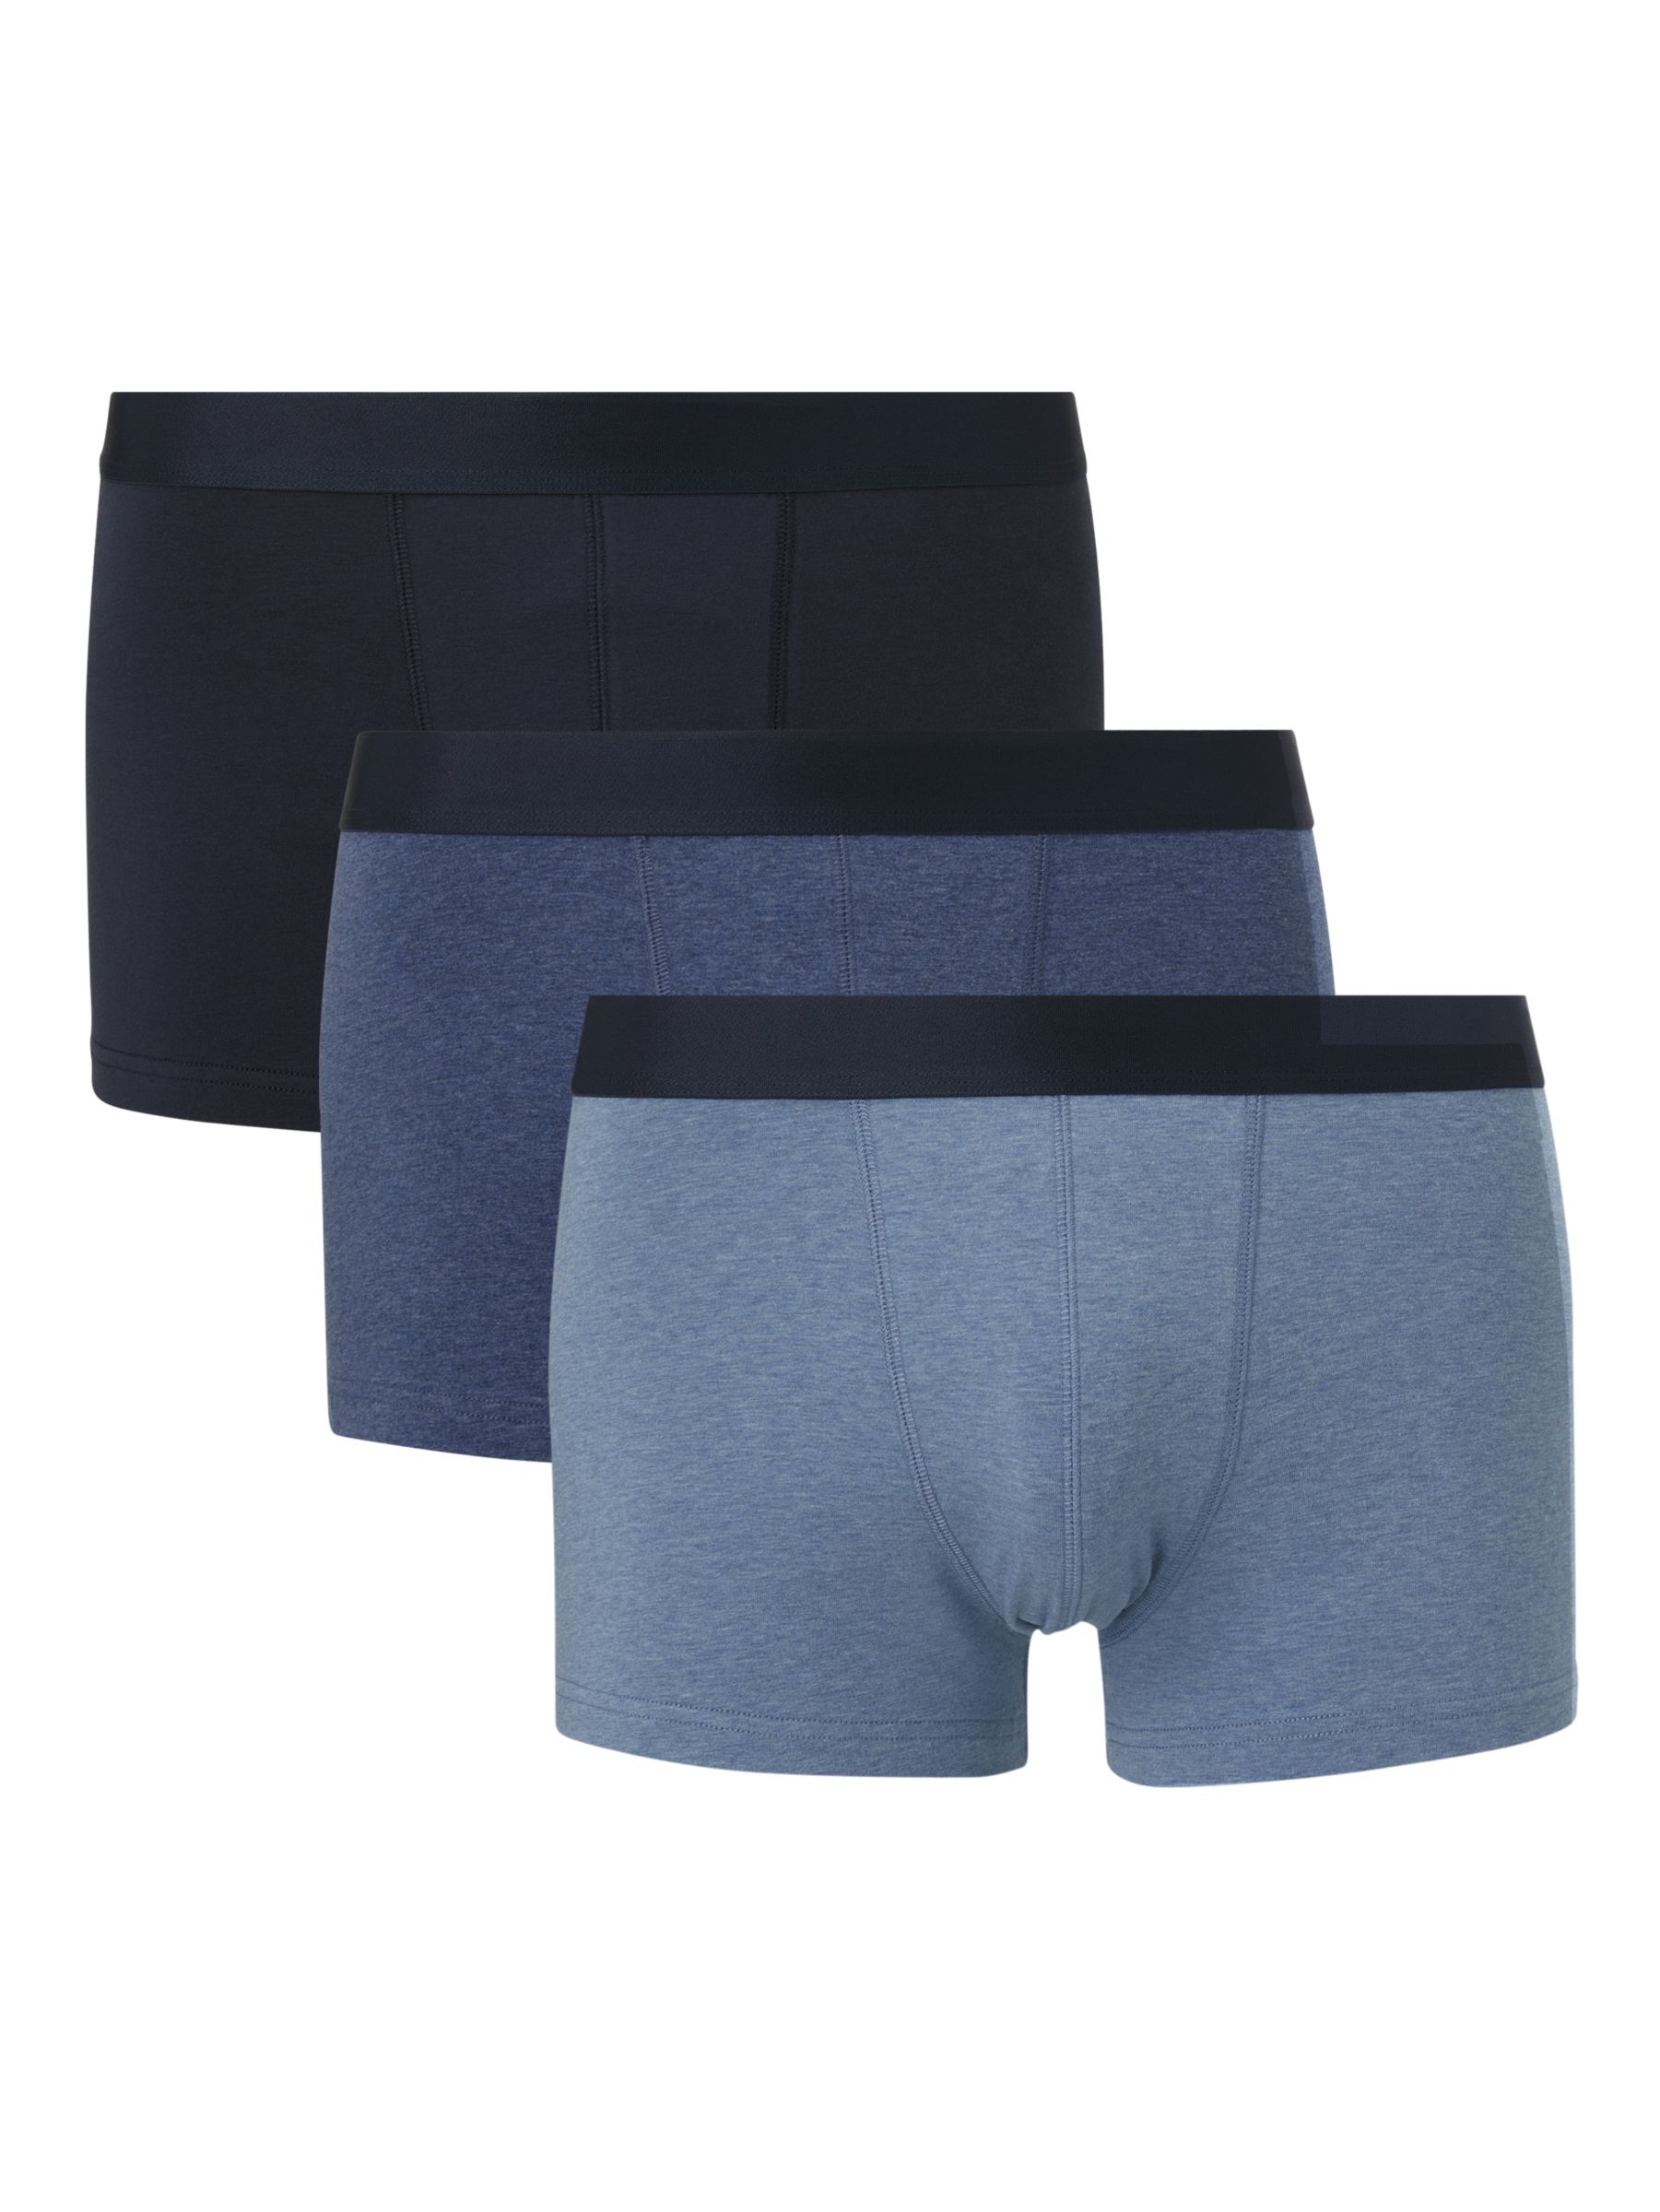 John Lewis Organic Cotton Jersey Double Button Boxers, Pack of 3, Blue/Multi